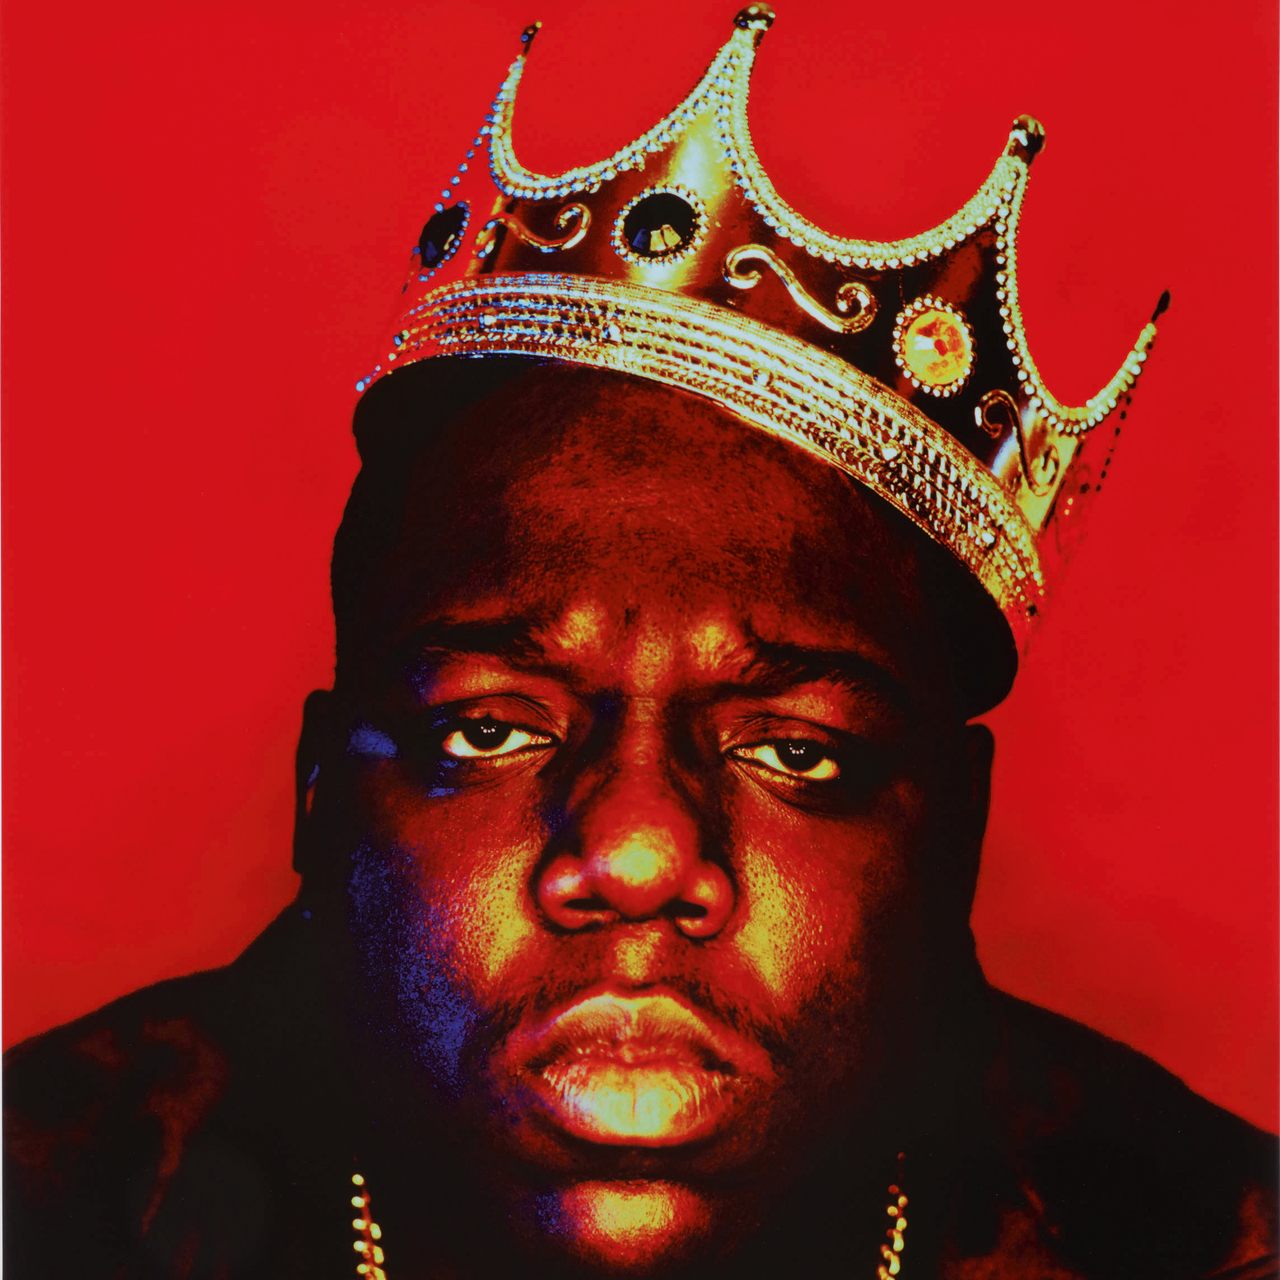 The Notorious B.I.G. as the "King of New York."